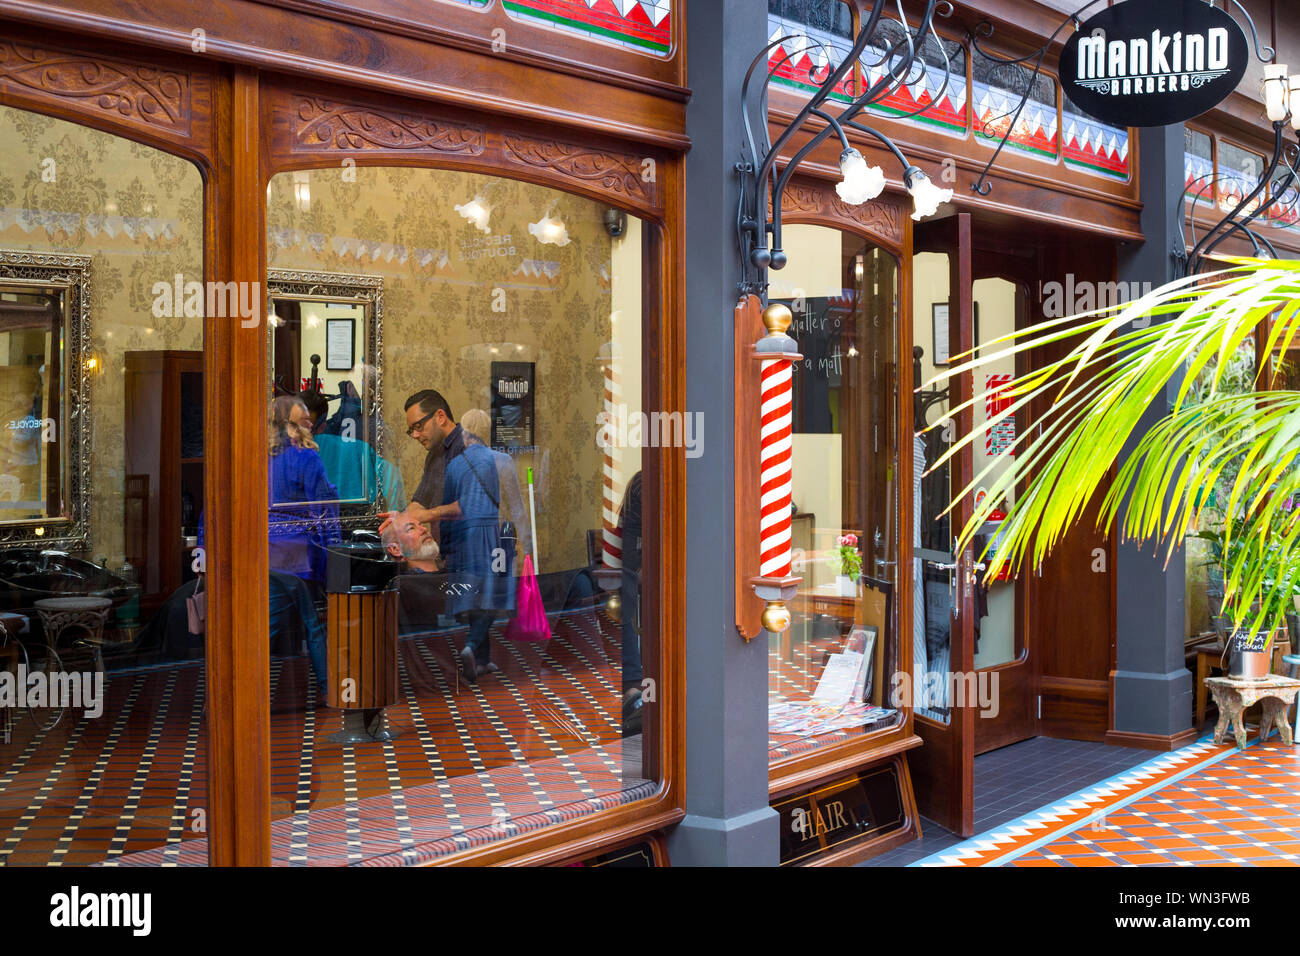 Christchurch, New Zealand, September 2 2019: View through the open door of the old style ManKind Barber shop at The Tannery. Stock Photo